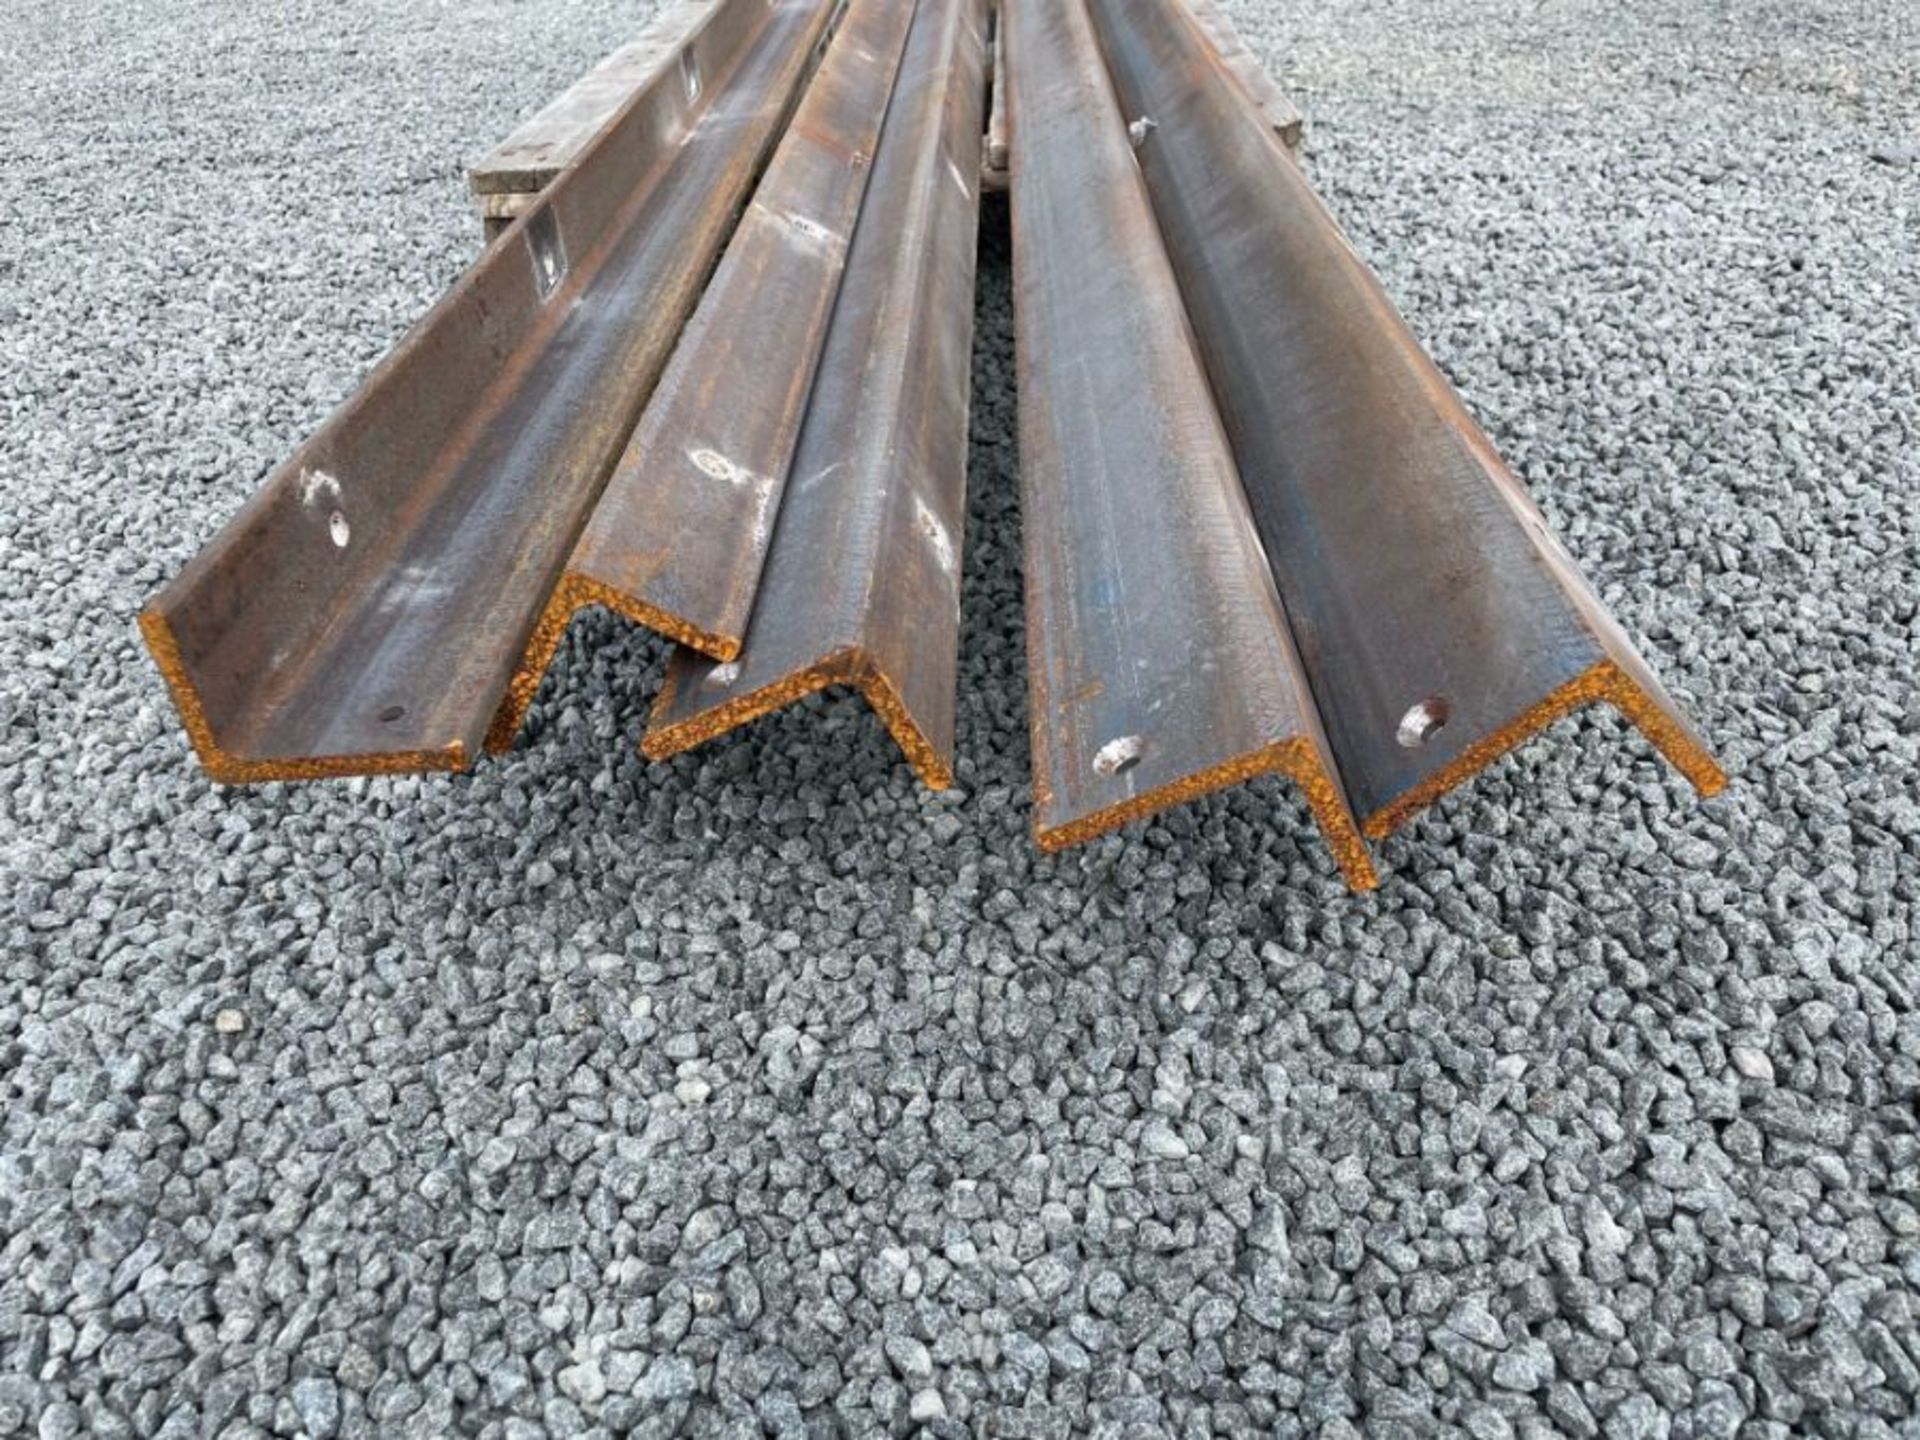 5 X LENGTHS OF 4 X 3” ANGLE IRON 10MM THICK (LENGTHS 118” - 121”) (HAMMER VAT ON THIS ITEM) - Image 3 of 4